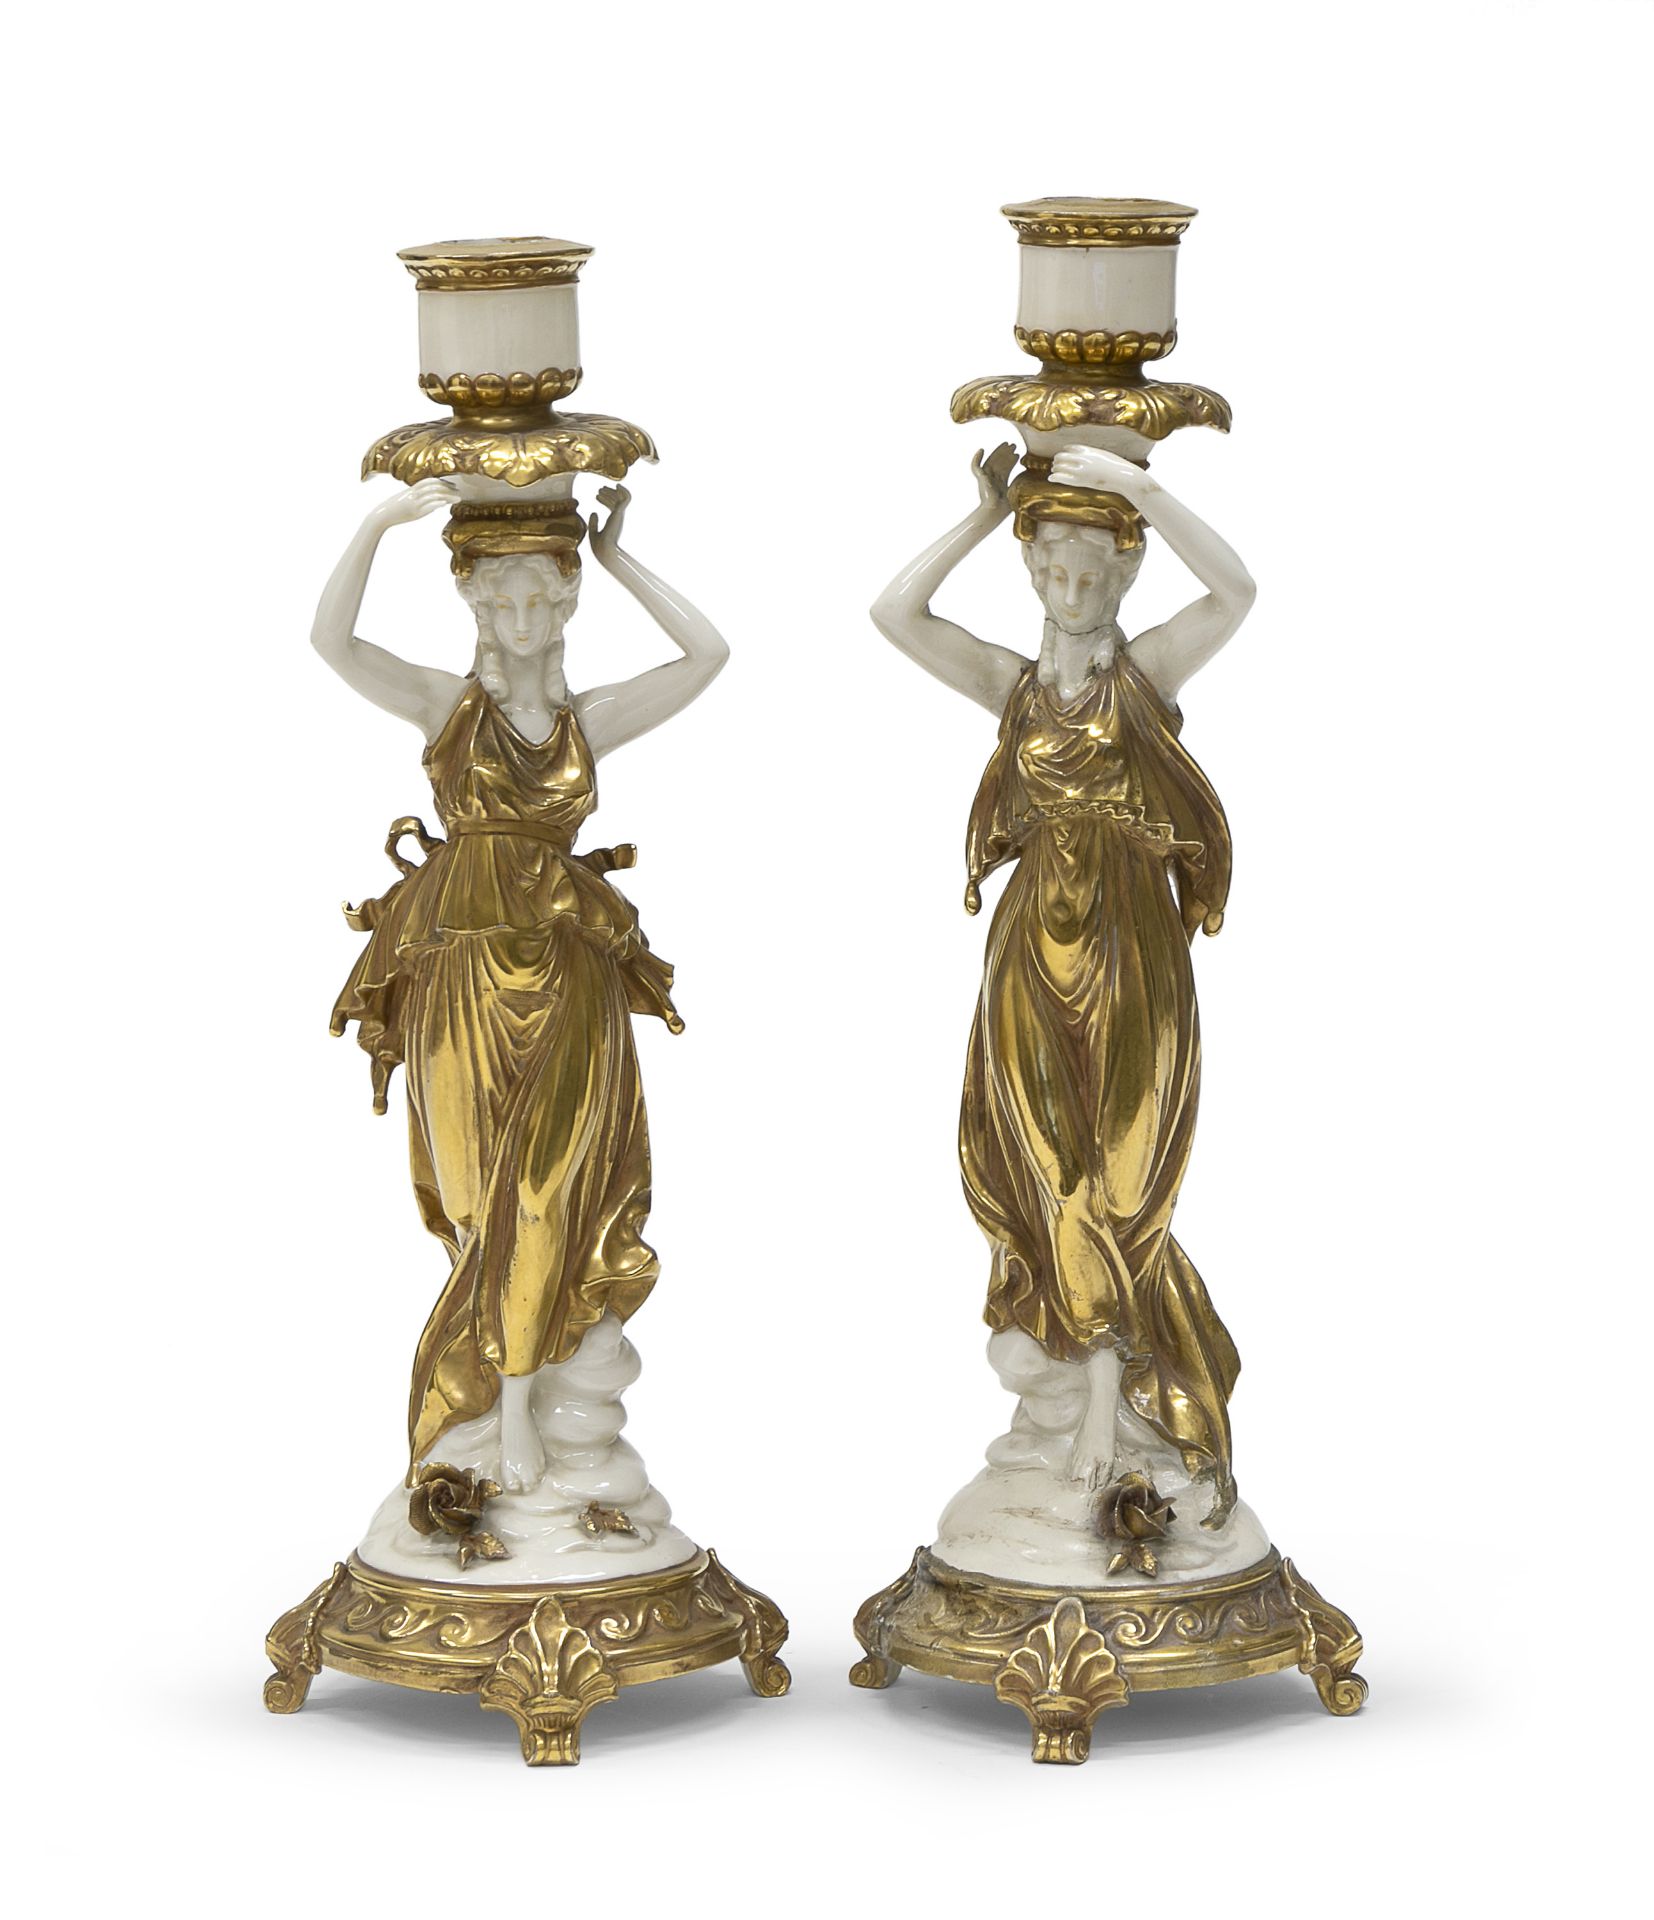 PAIR OF PORCELAIN CANDLESTICKS GINORI END OF THE 19TH CENTURY